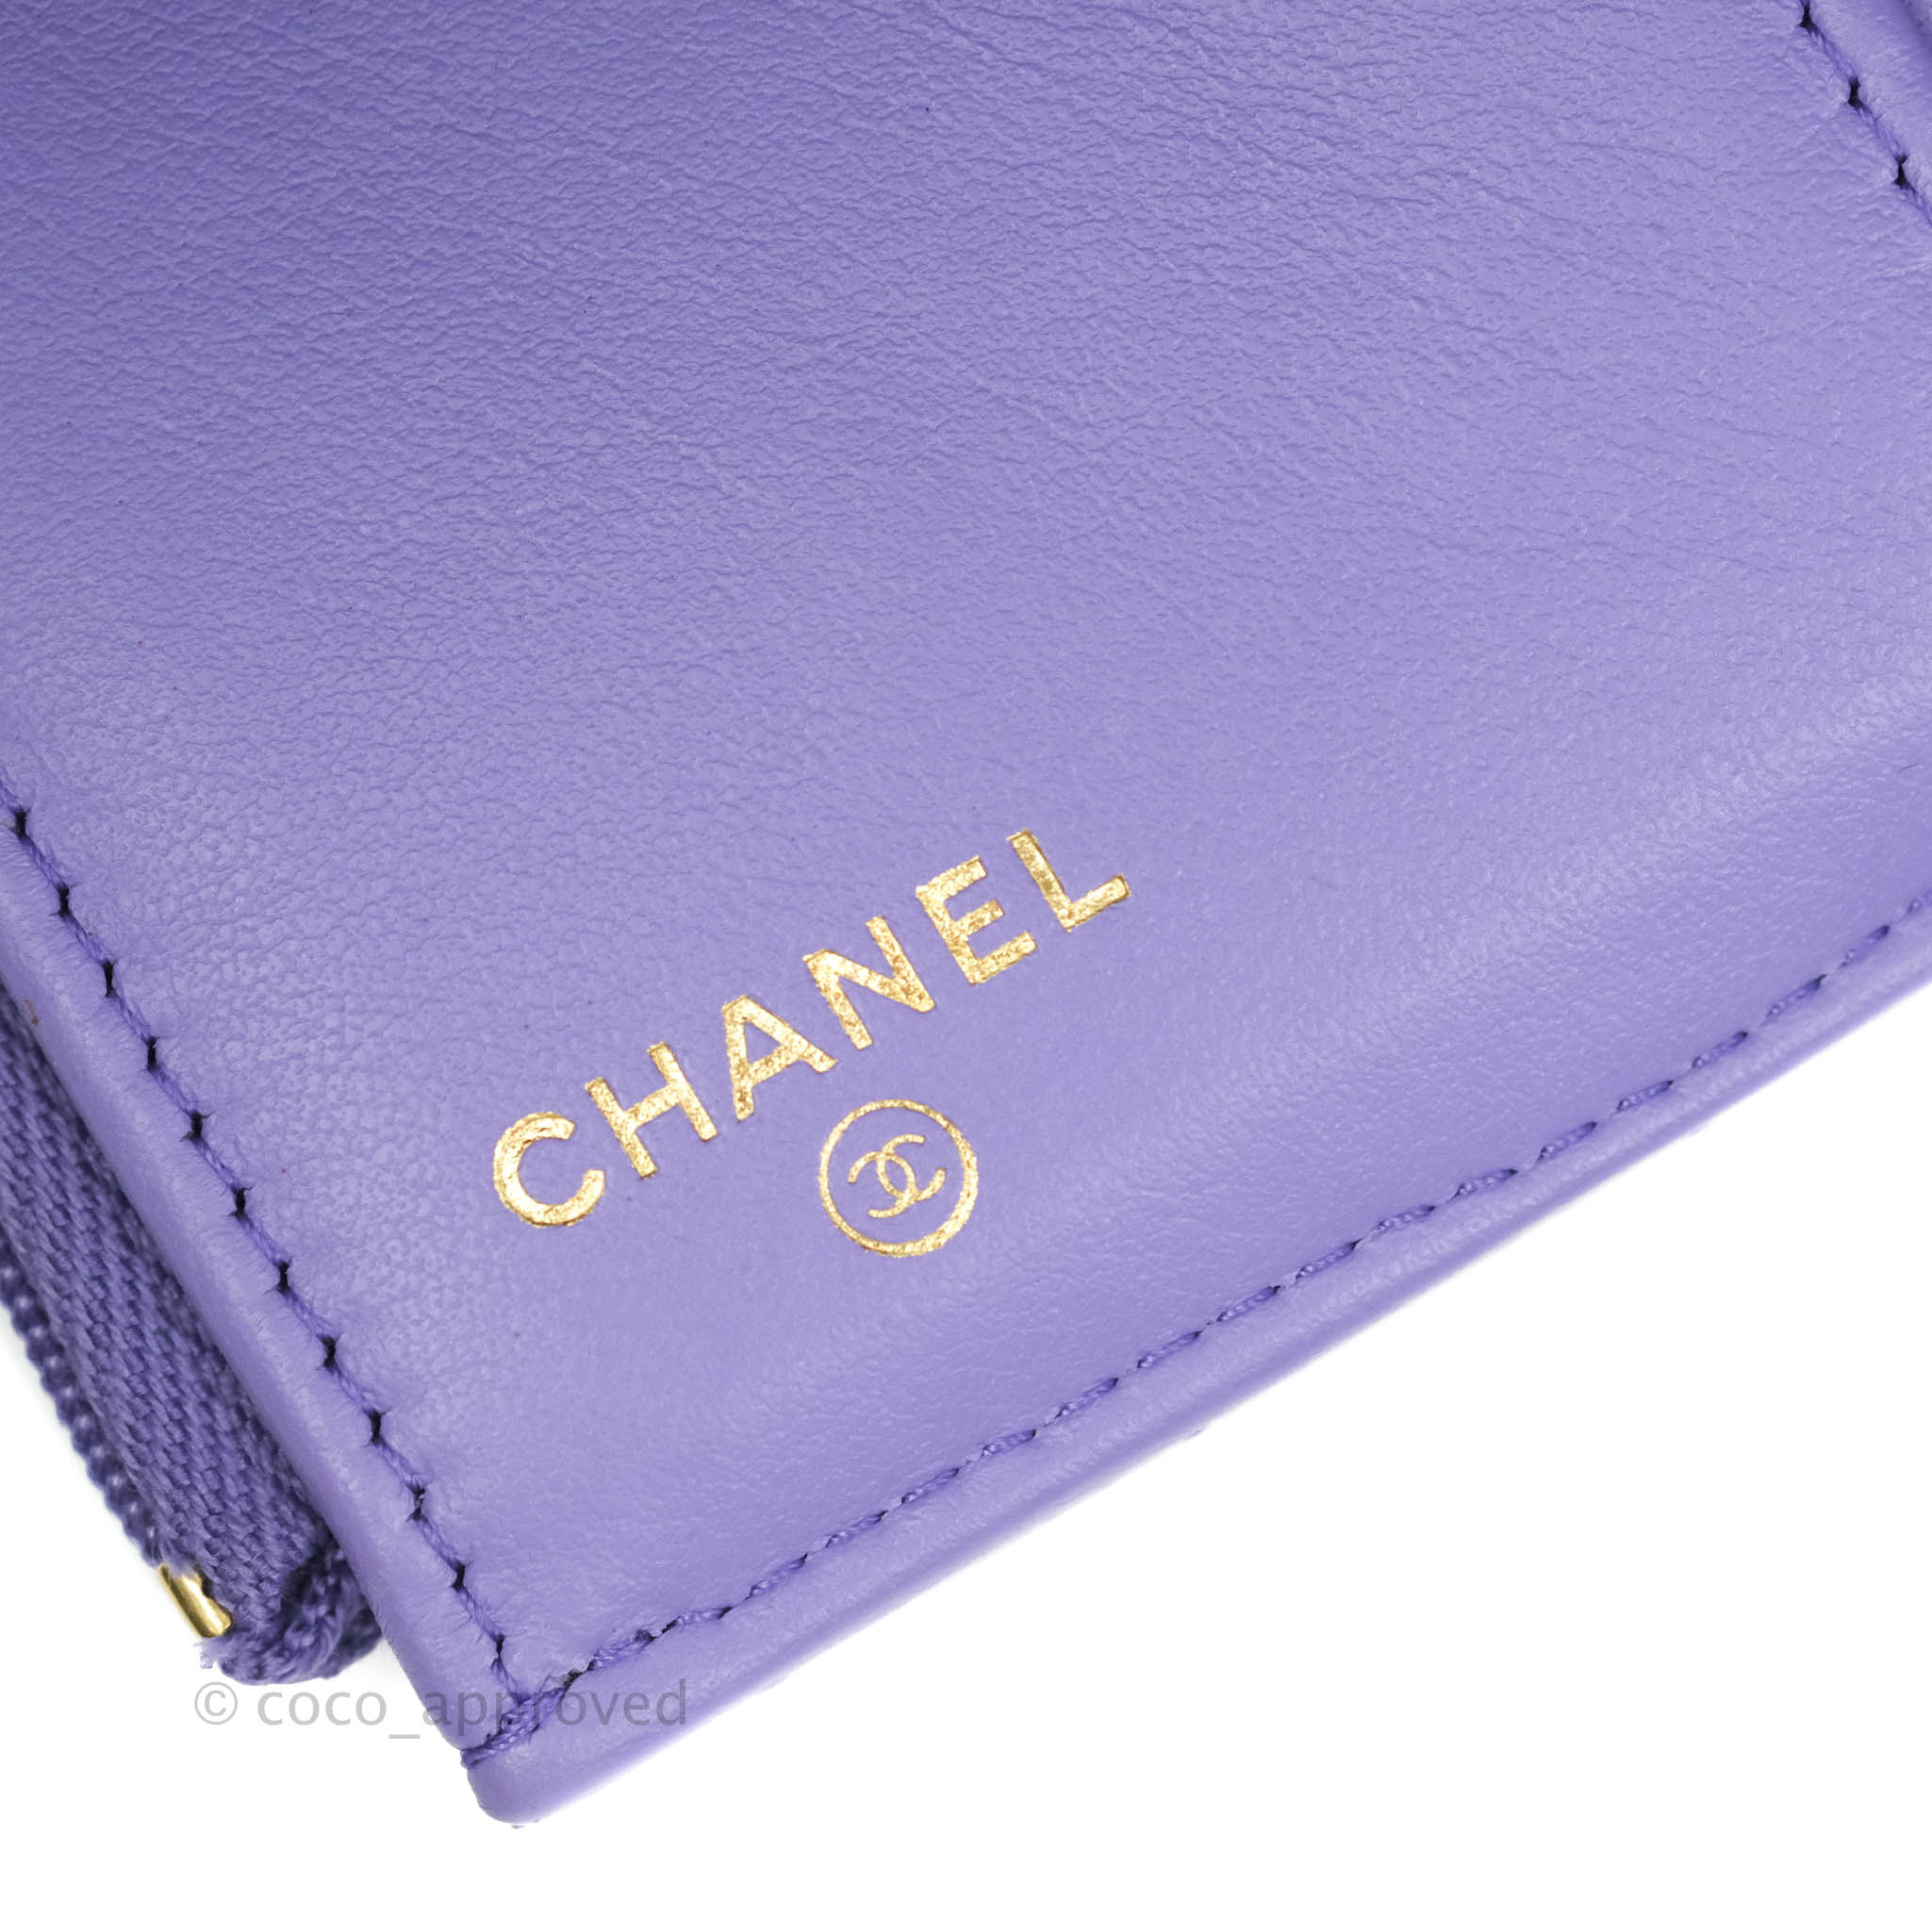 Timeless/classique leather card wallet Chanel Purple in Leather - 31396841